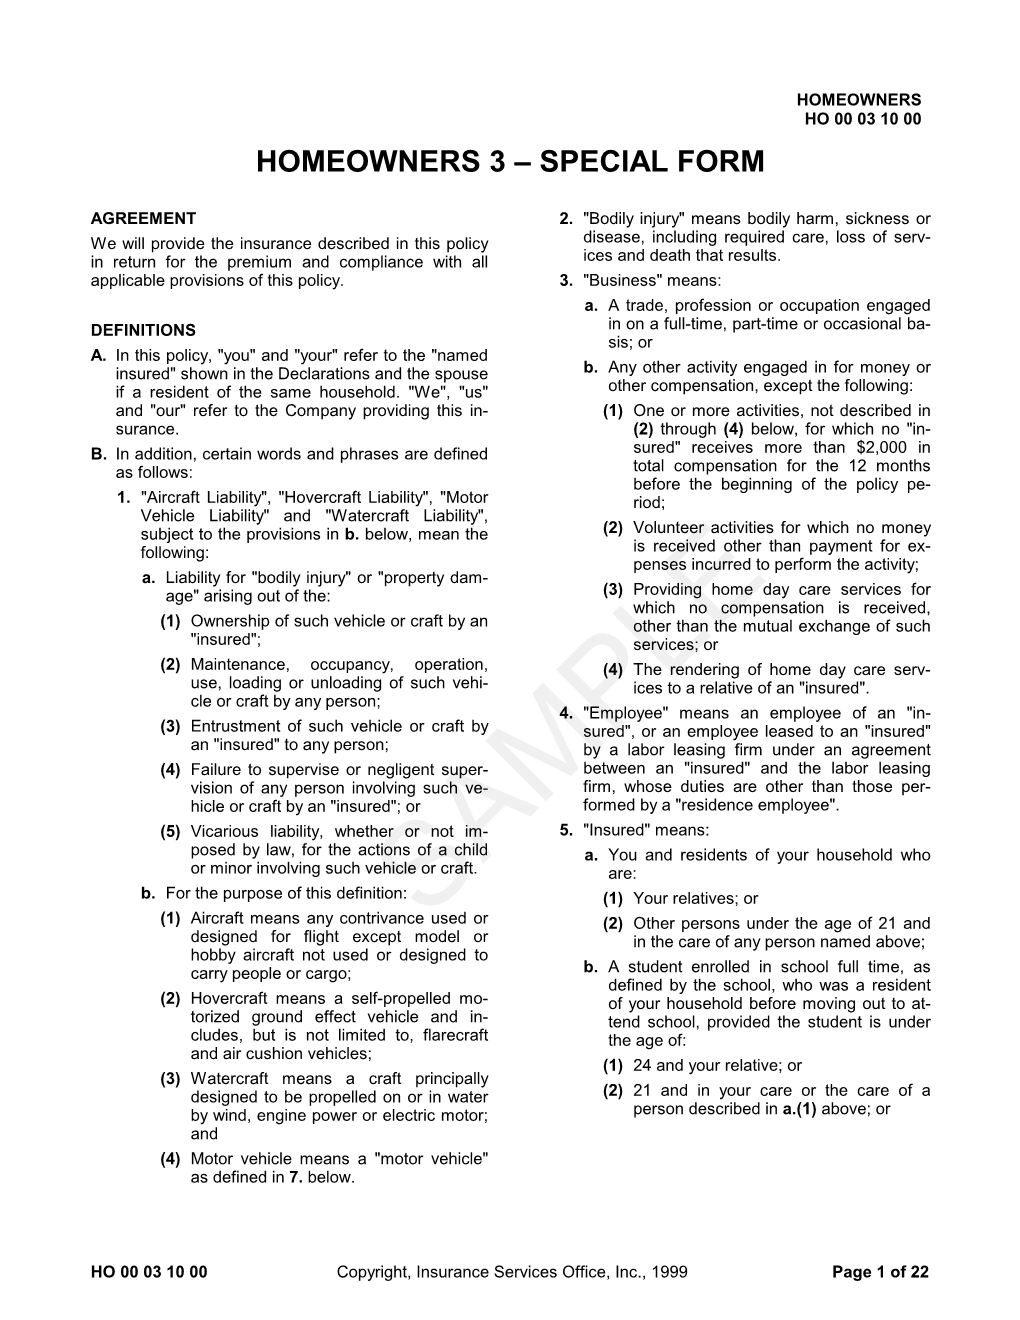 Homeowners 3 – Special Form